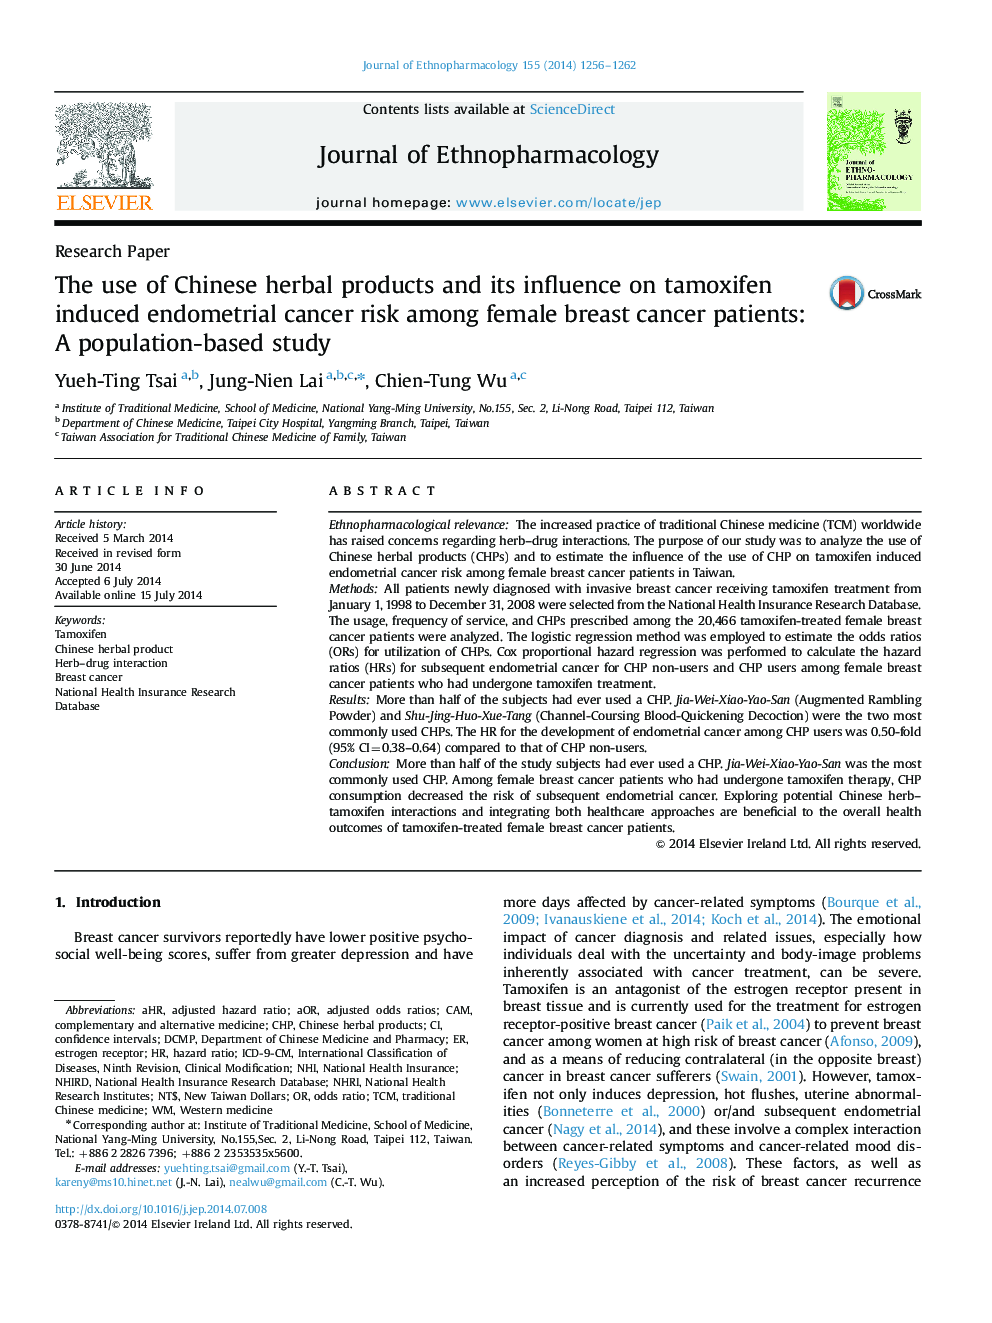 The use of Chinese herbal products and its influence on tamoxifen induced endometrial cancer risk among female breast cancer patients: A population-based study